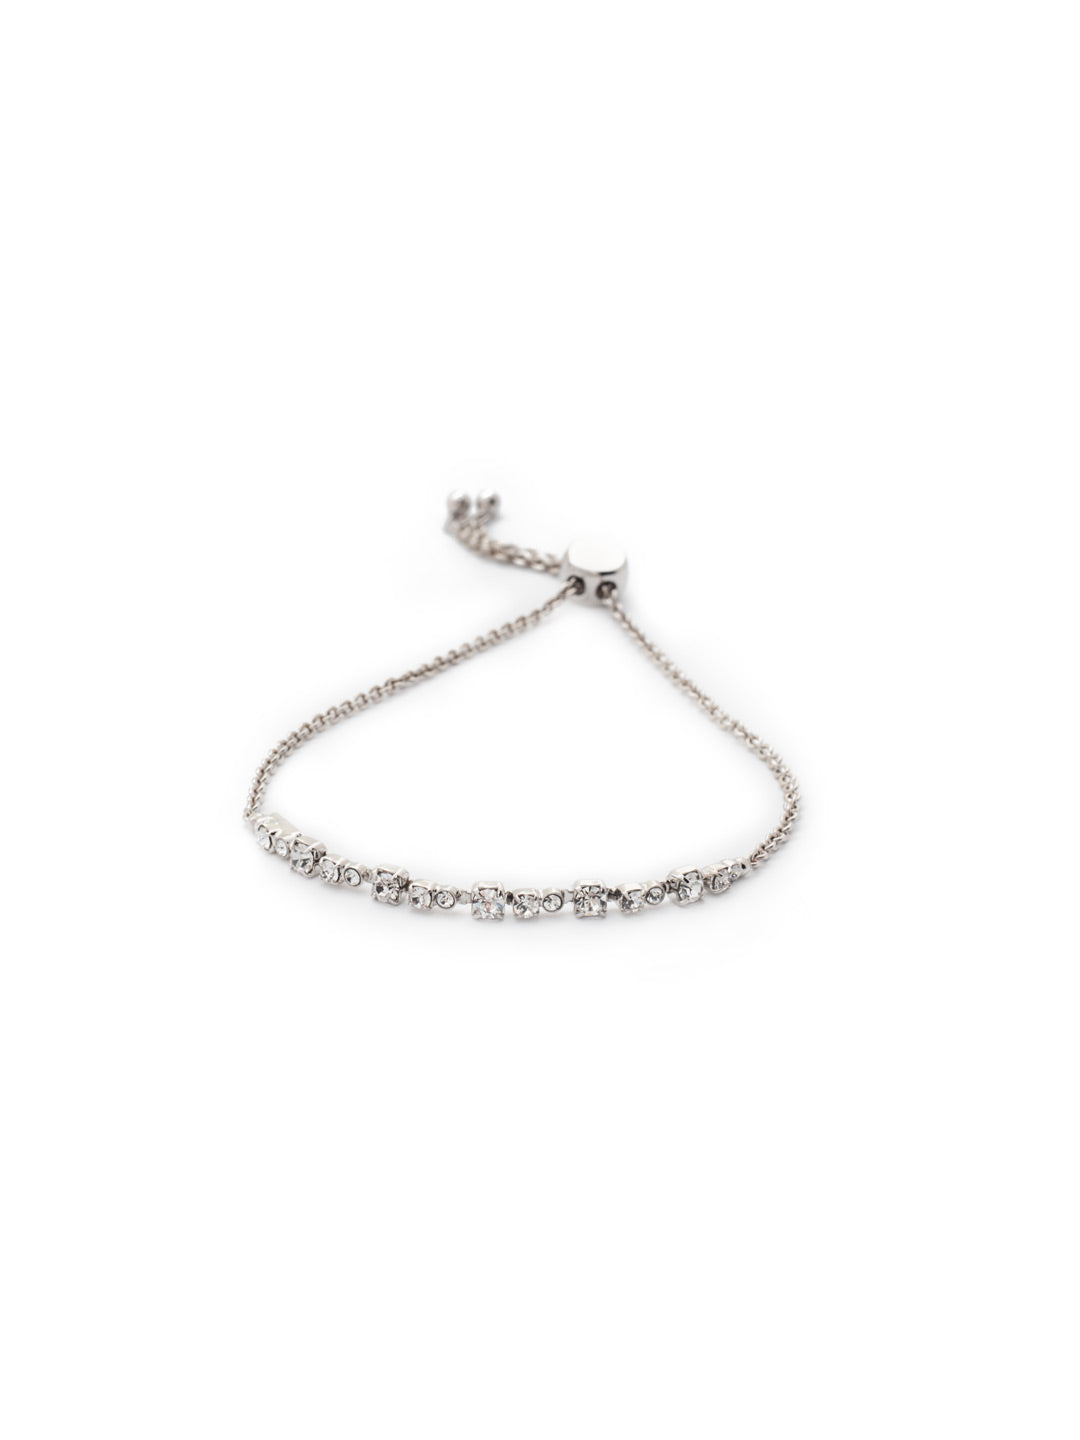 Glimmer Slider Bracelet - BEK14RHCRY - <p>Add a bit of sparkle and shine to your wrist by sliding on this adjustable beauty with just enough bling to get you noticed. Slider bracelet closure. From Sorrelli's Crystal collection in our Palladium Silver-tone finish.</p>